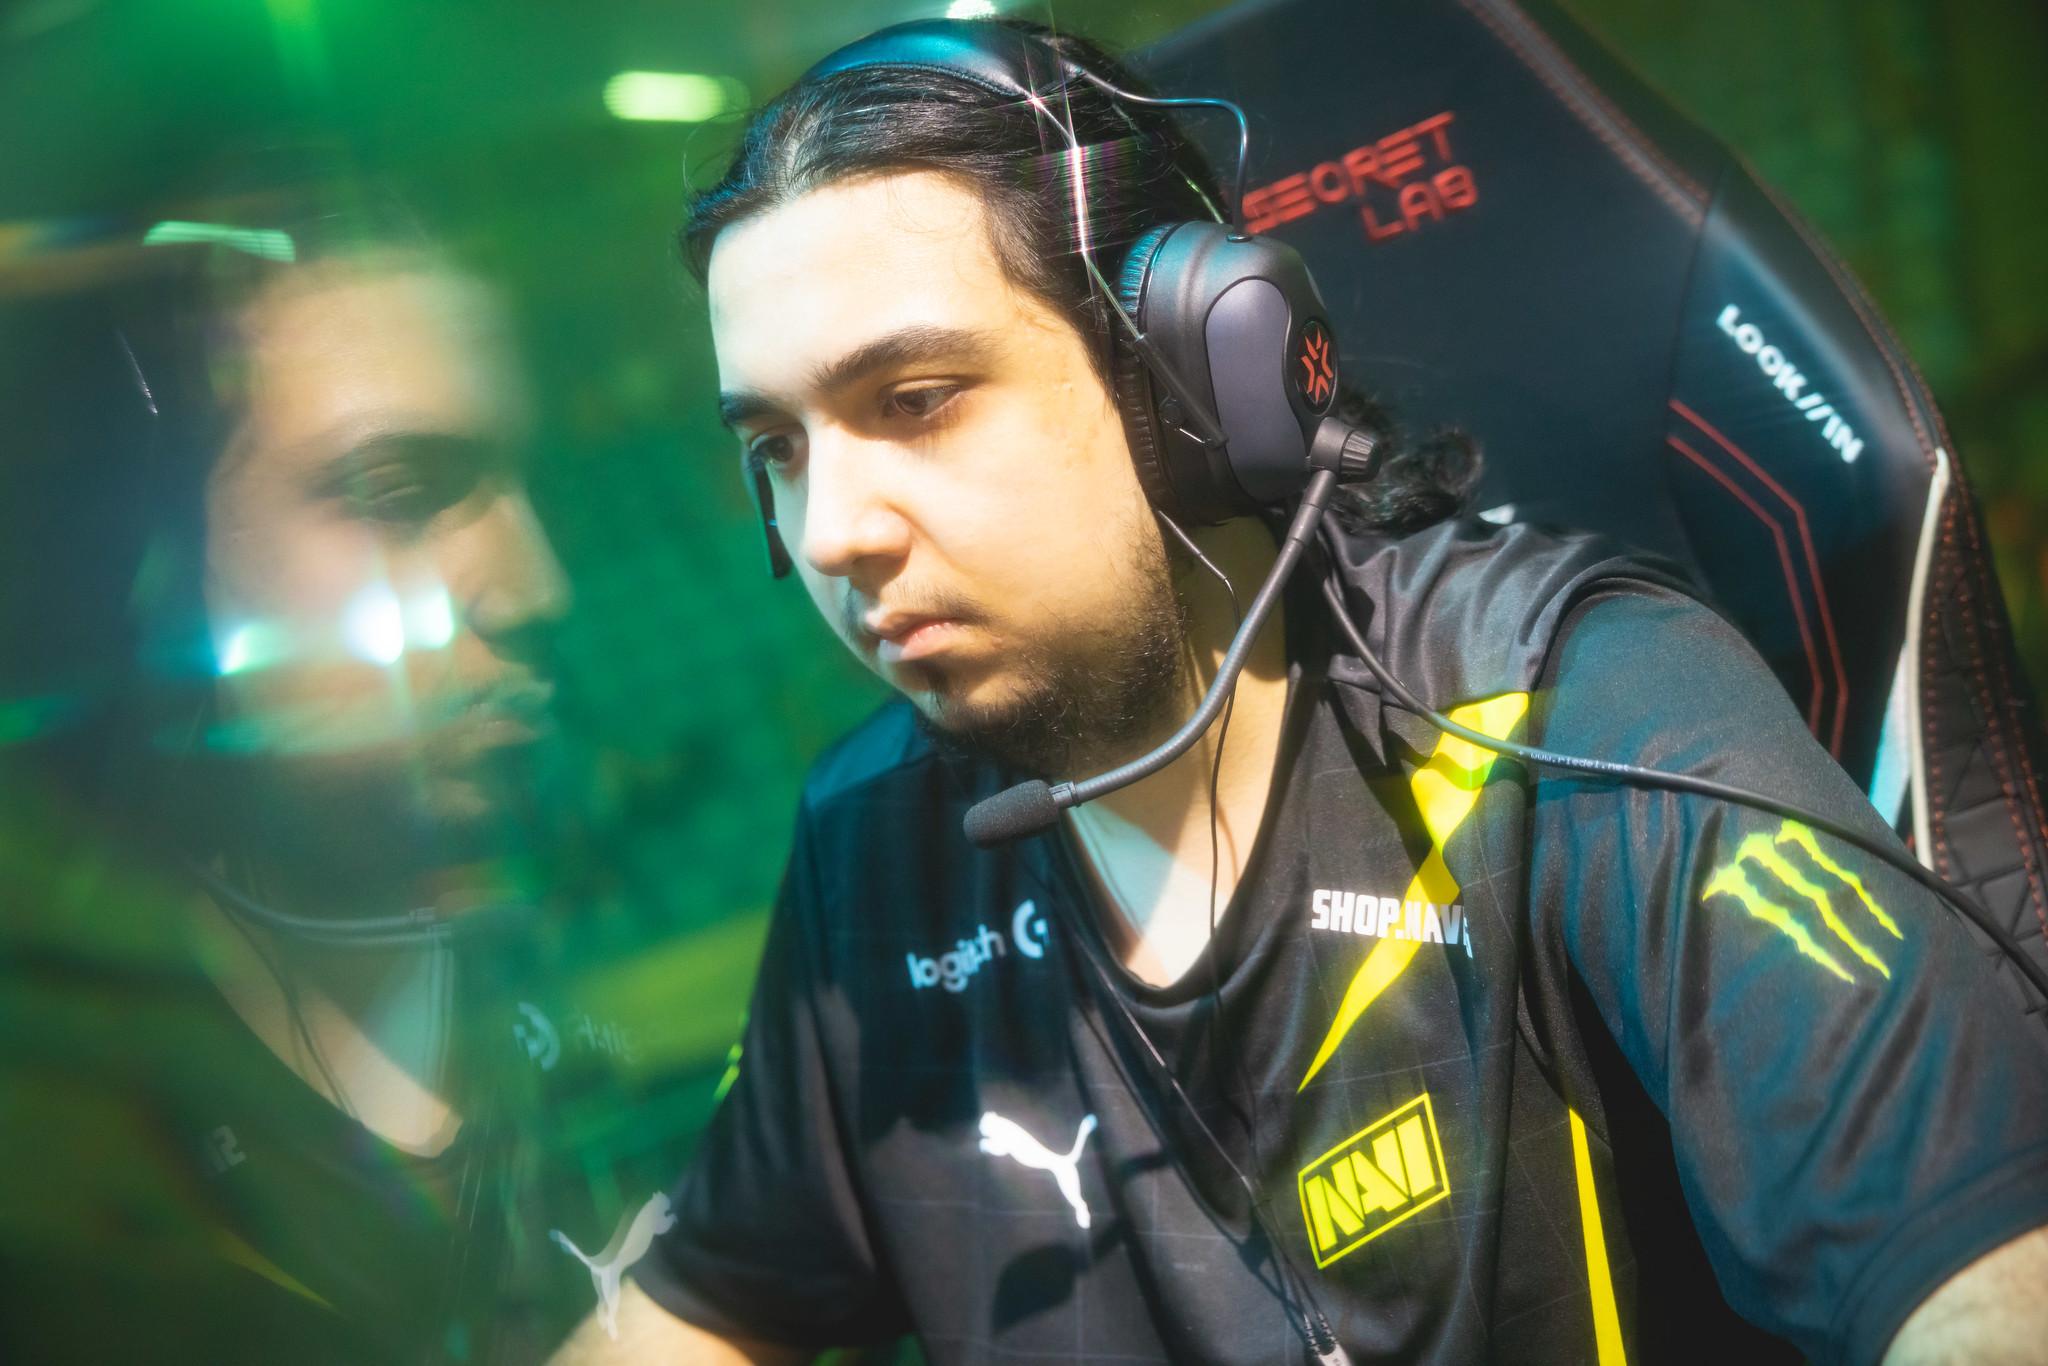 Mehmet "cNed" lpek of Natus Vincere prepares to compete at the VALORANT Champions Tour 2023: LOCK//IN Semifinals on March 3, 2023 in Sao Paulo, Brazil.